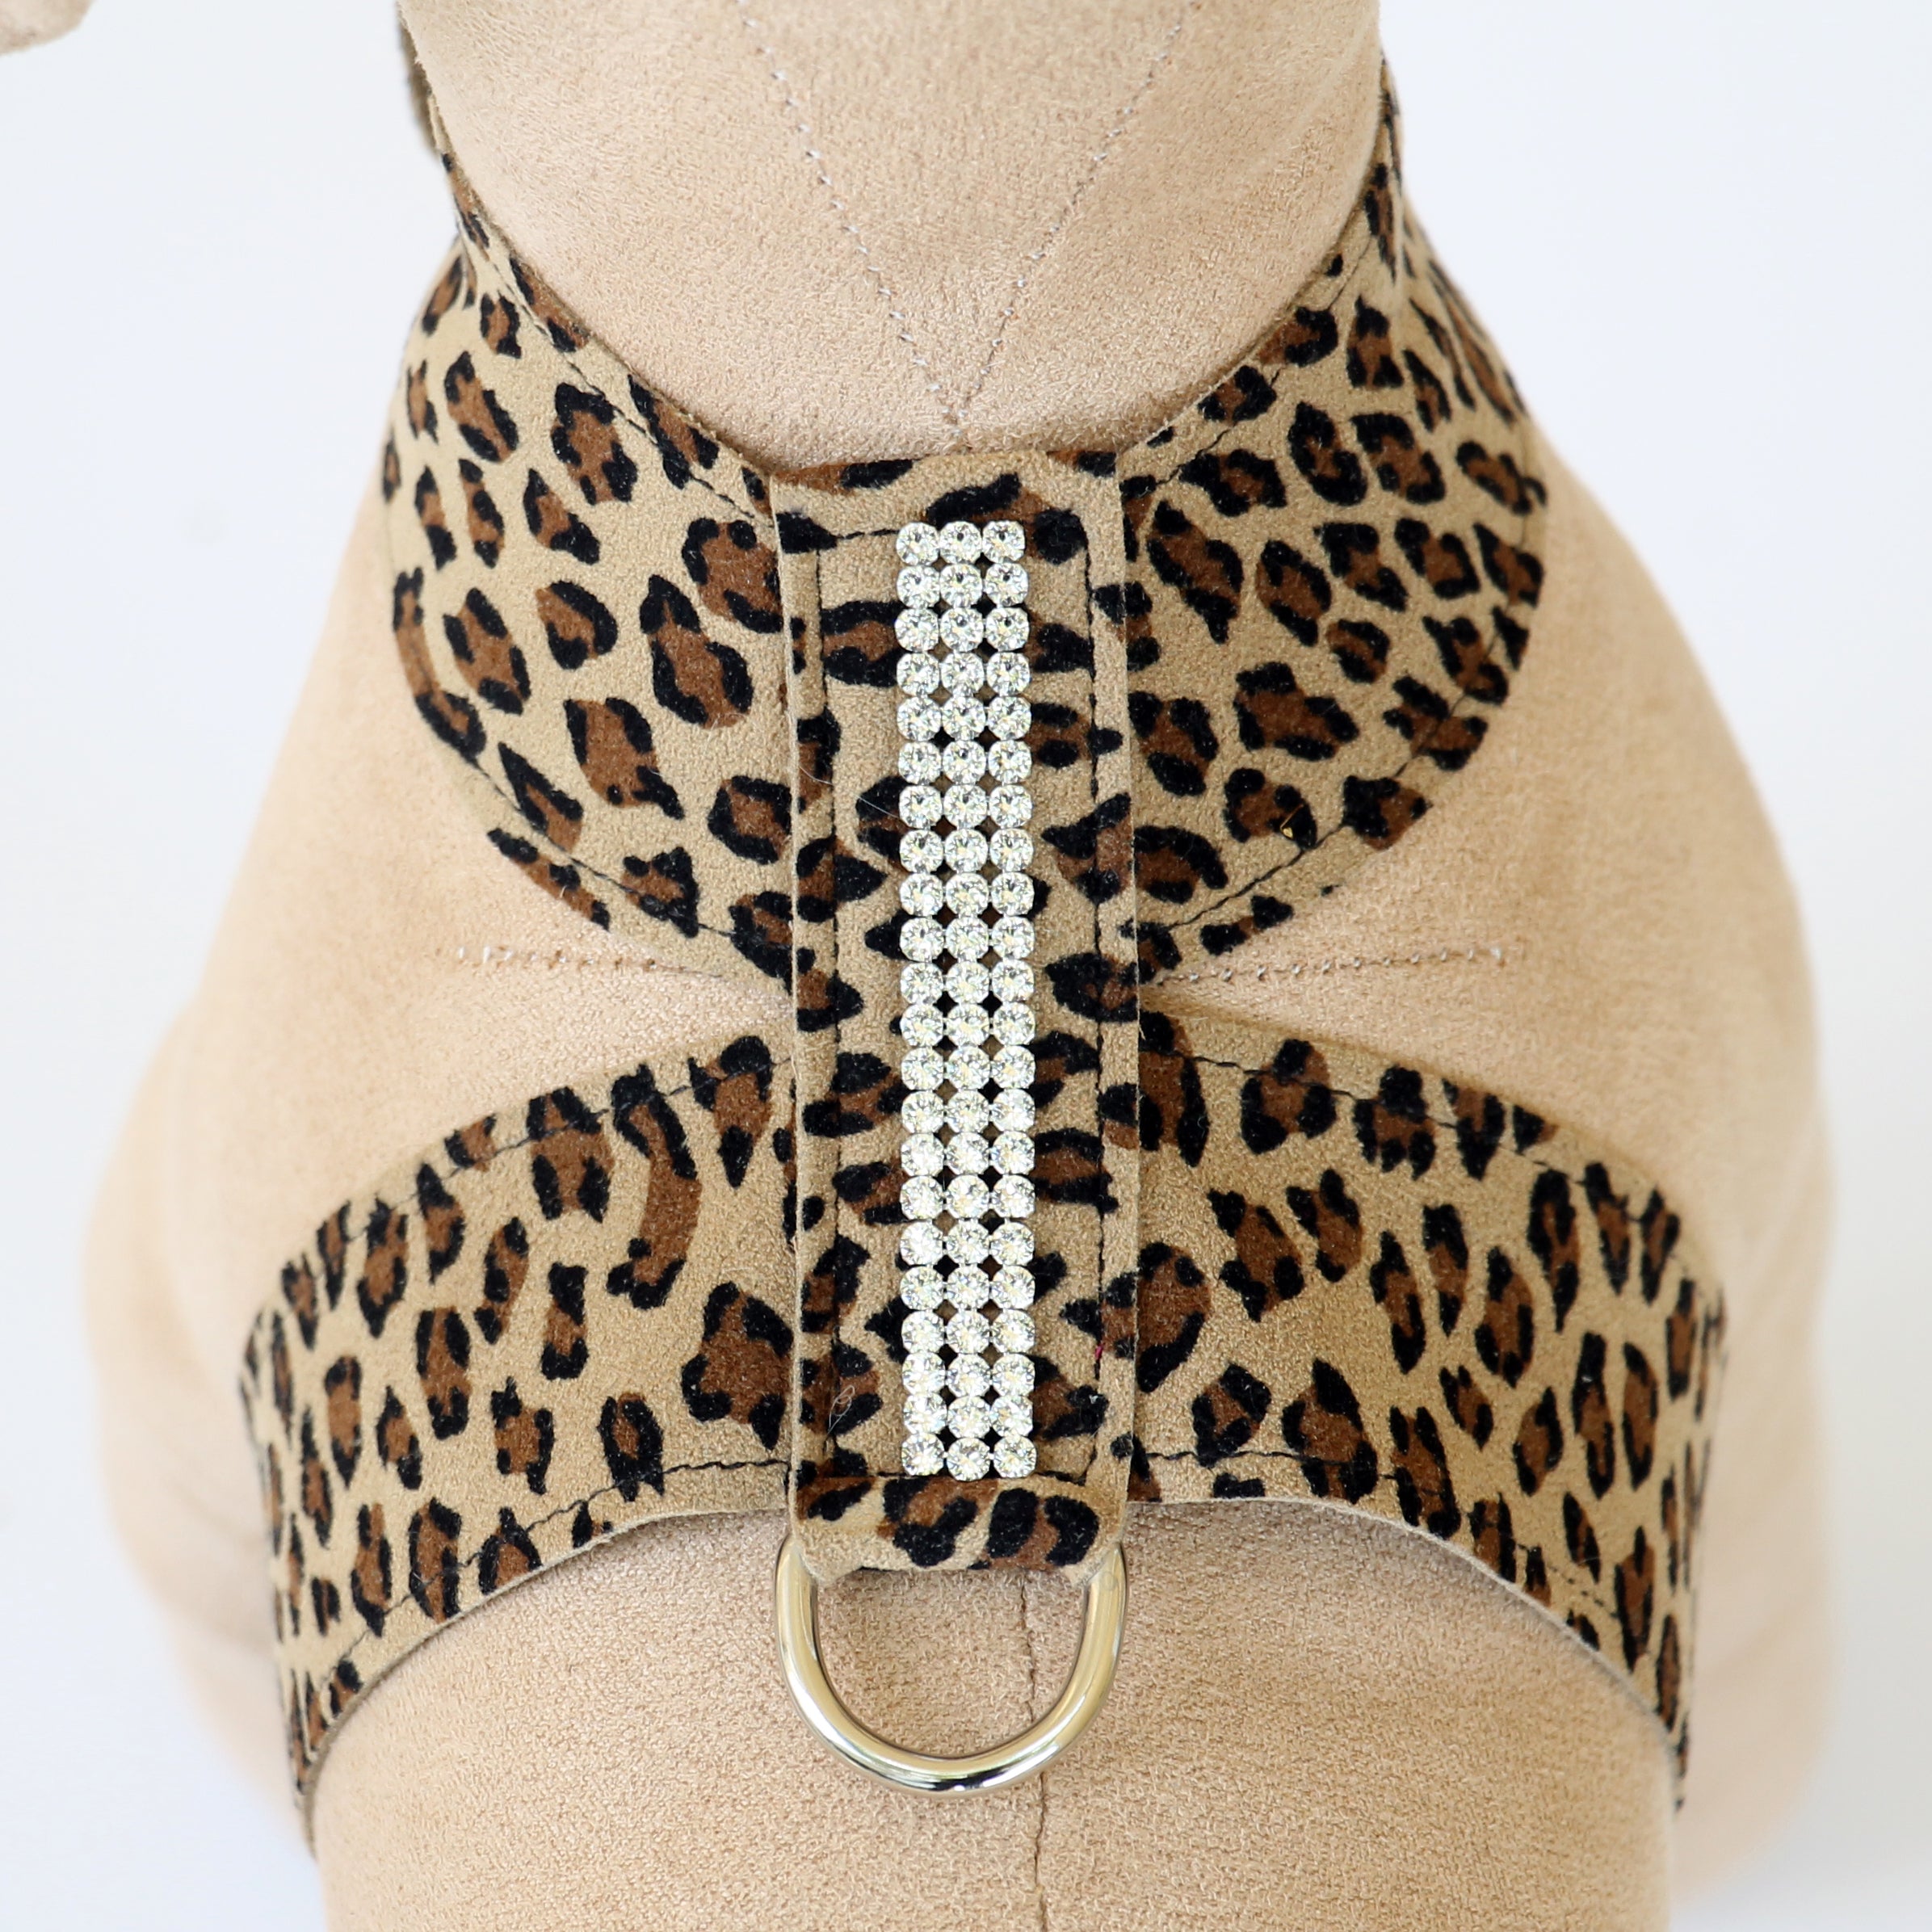 Pet Boutique - Dog Harness - Cheetah Giltmore 3-Row Crystal Pet Harness by Susan Lanci